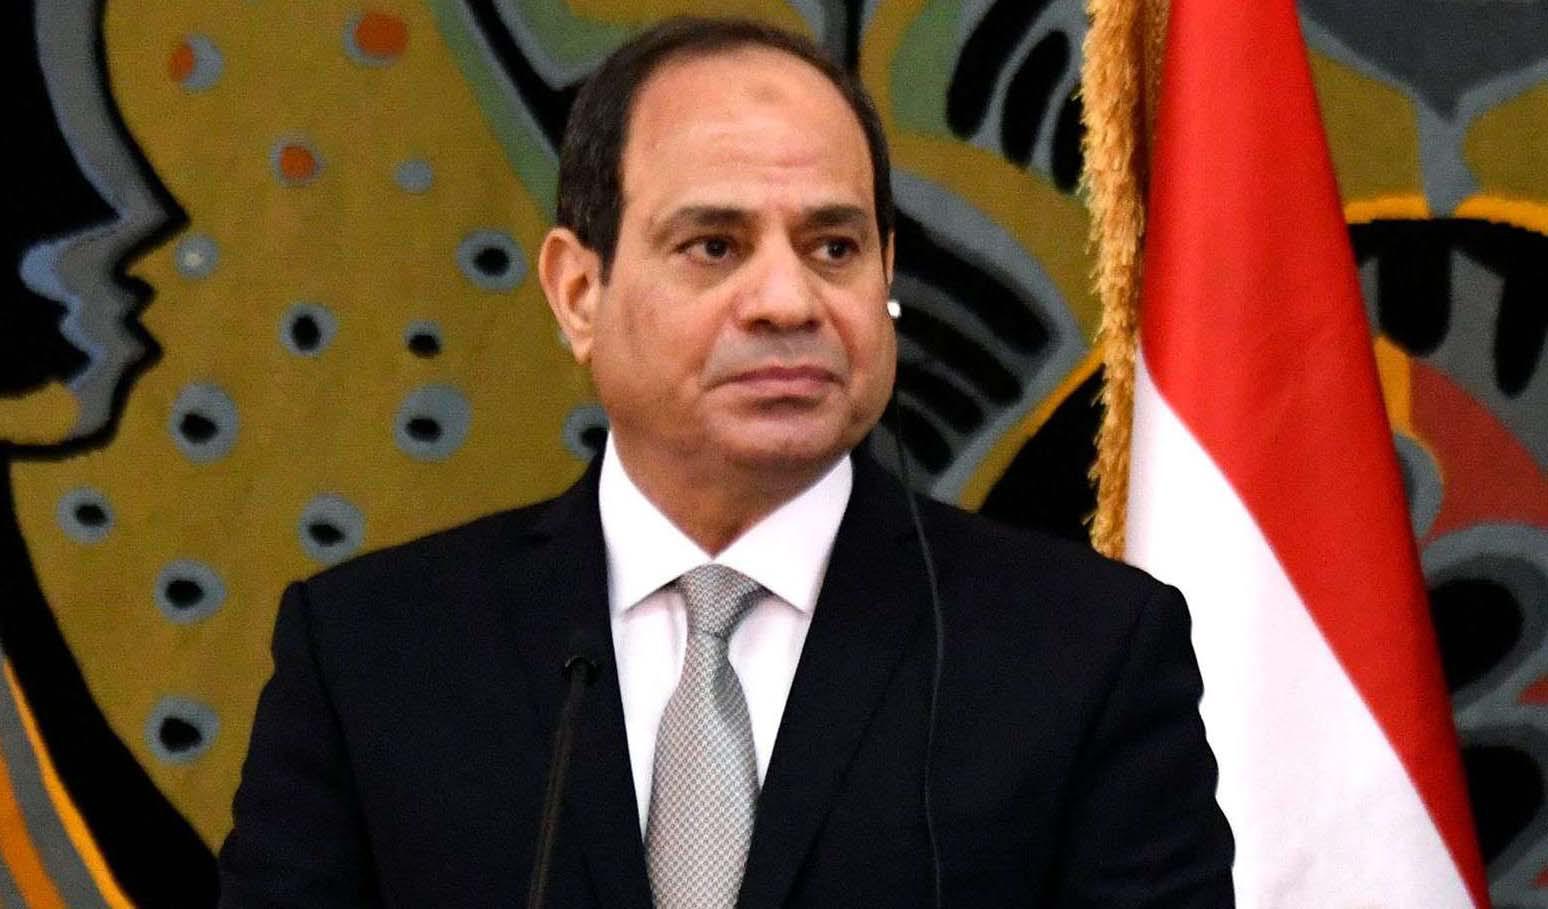 Sisi says he firmly rejects any form of violence or terrorism from anyone in the name of defending religion